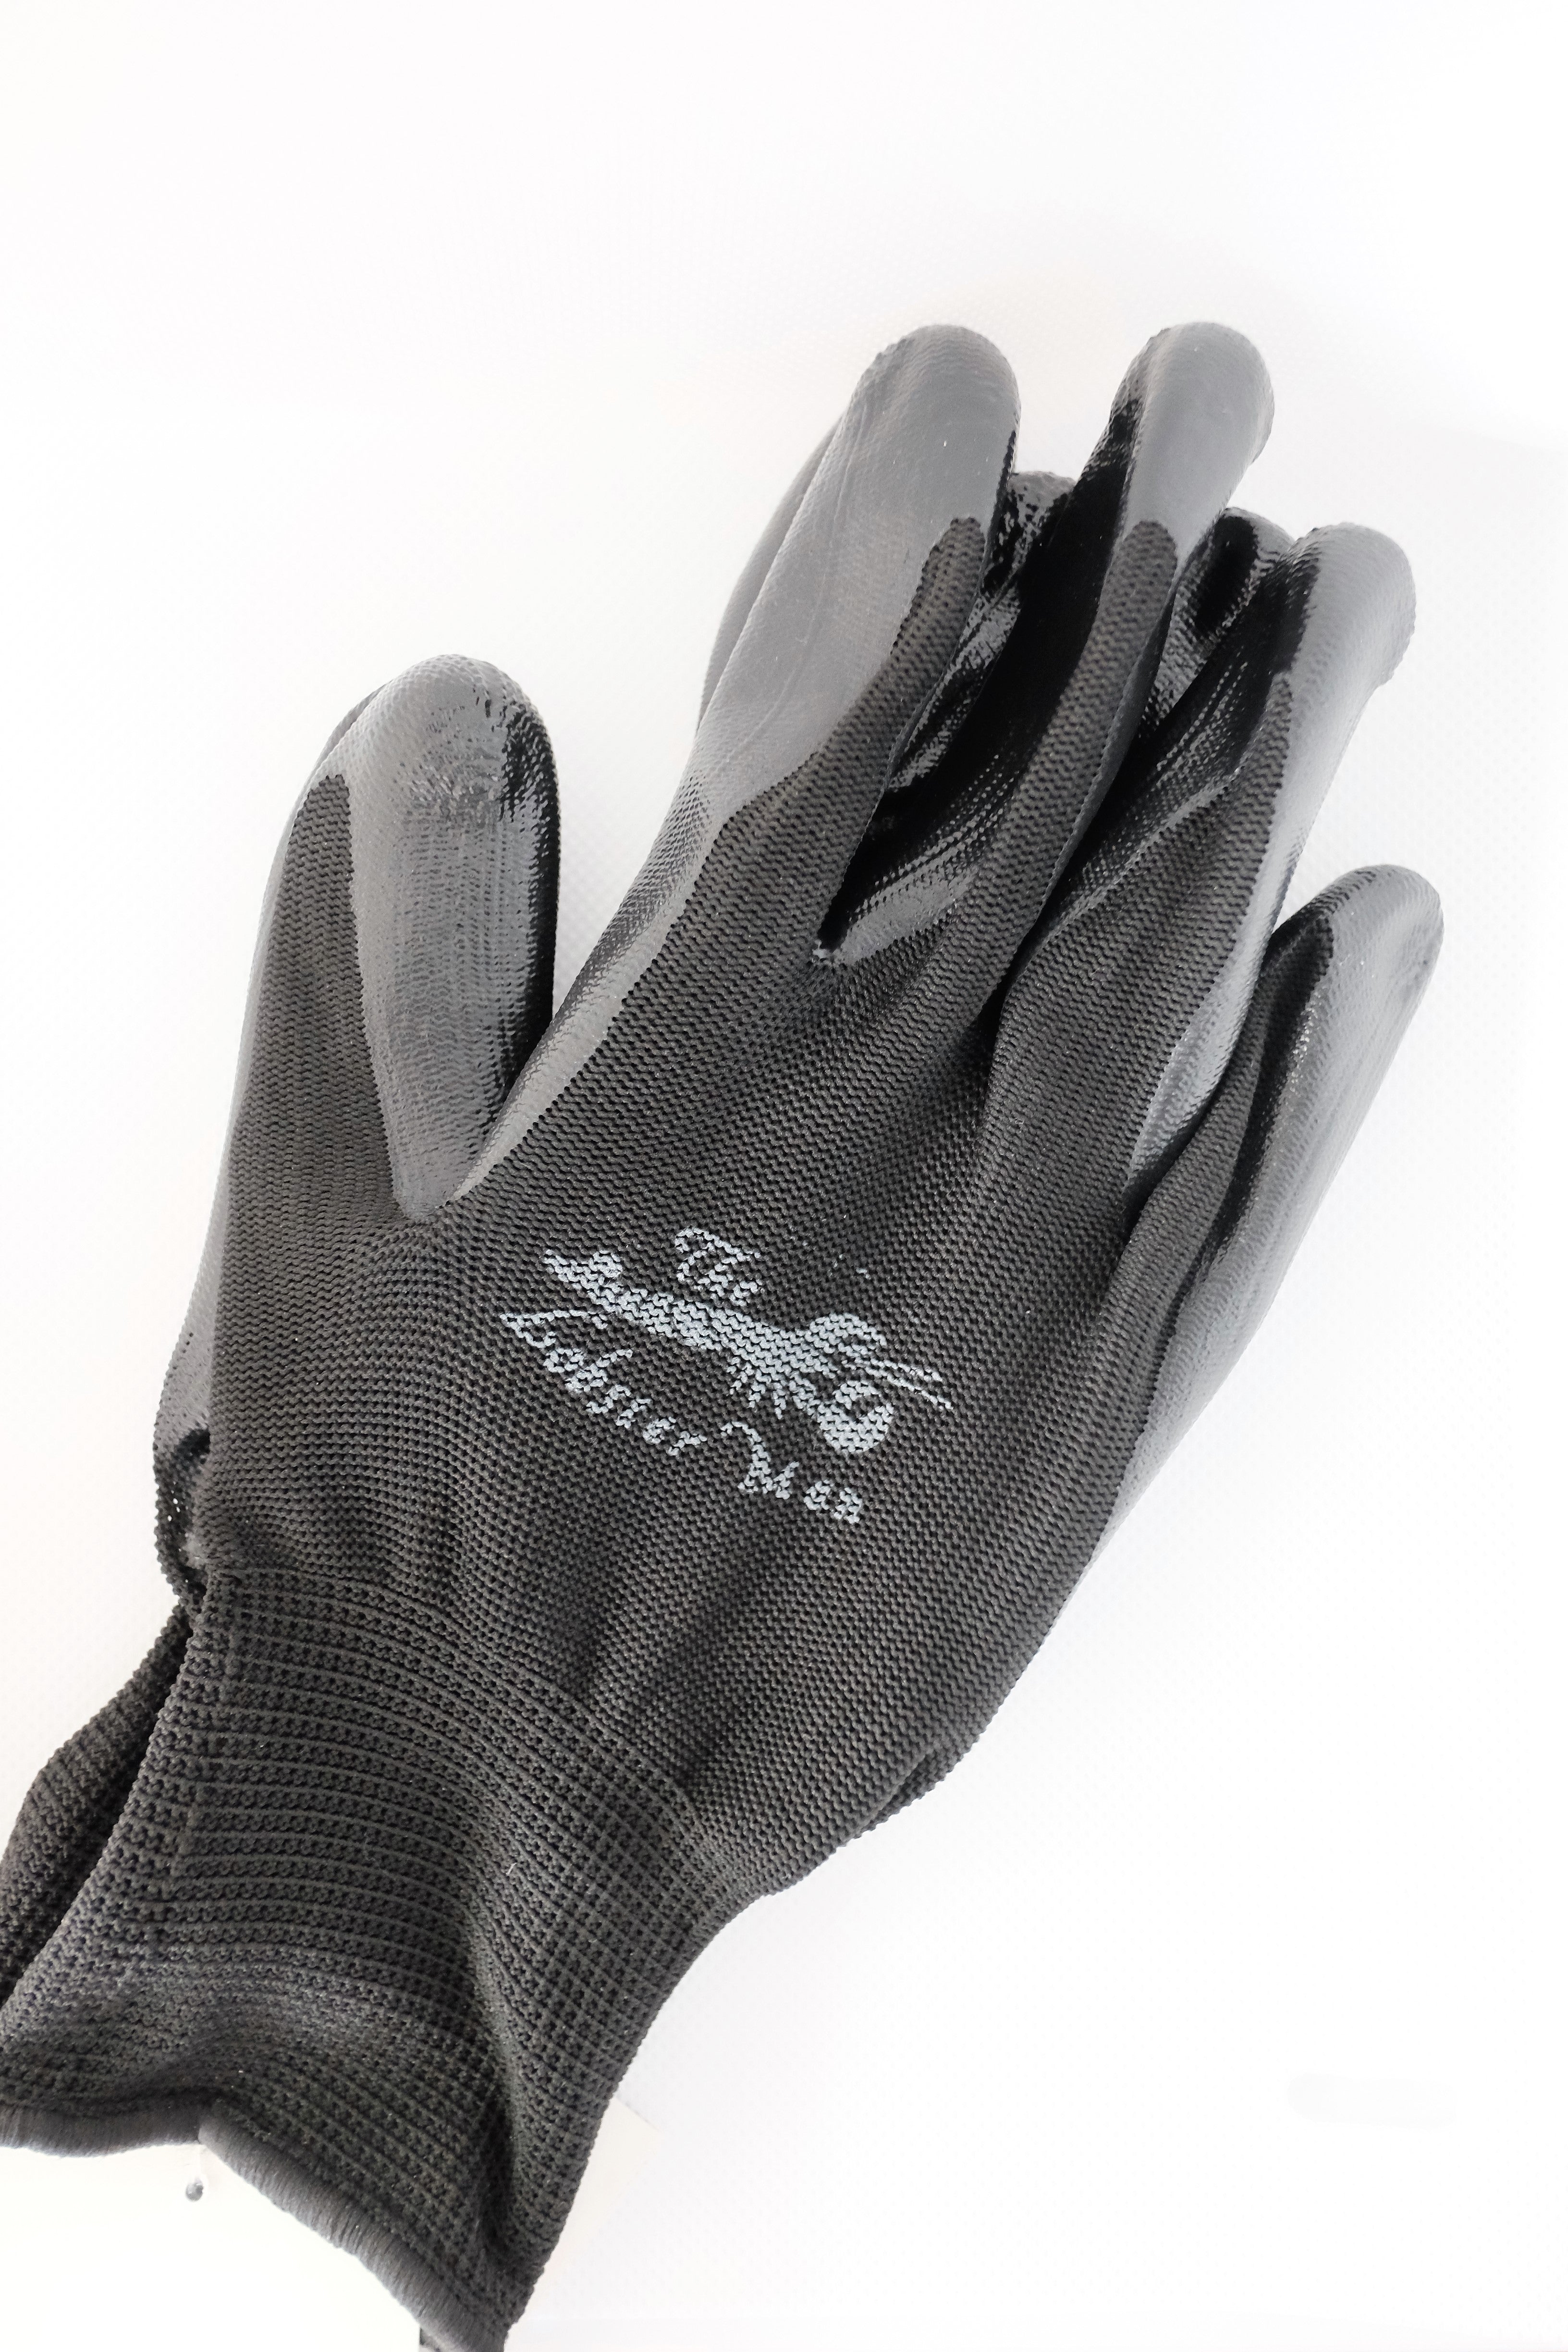 R. Murphy Coated Oyster & Clam Shucking Gloves - UJ Ramelson Co